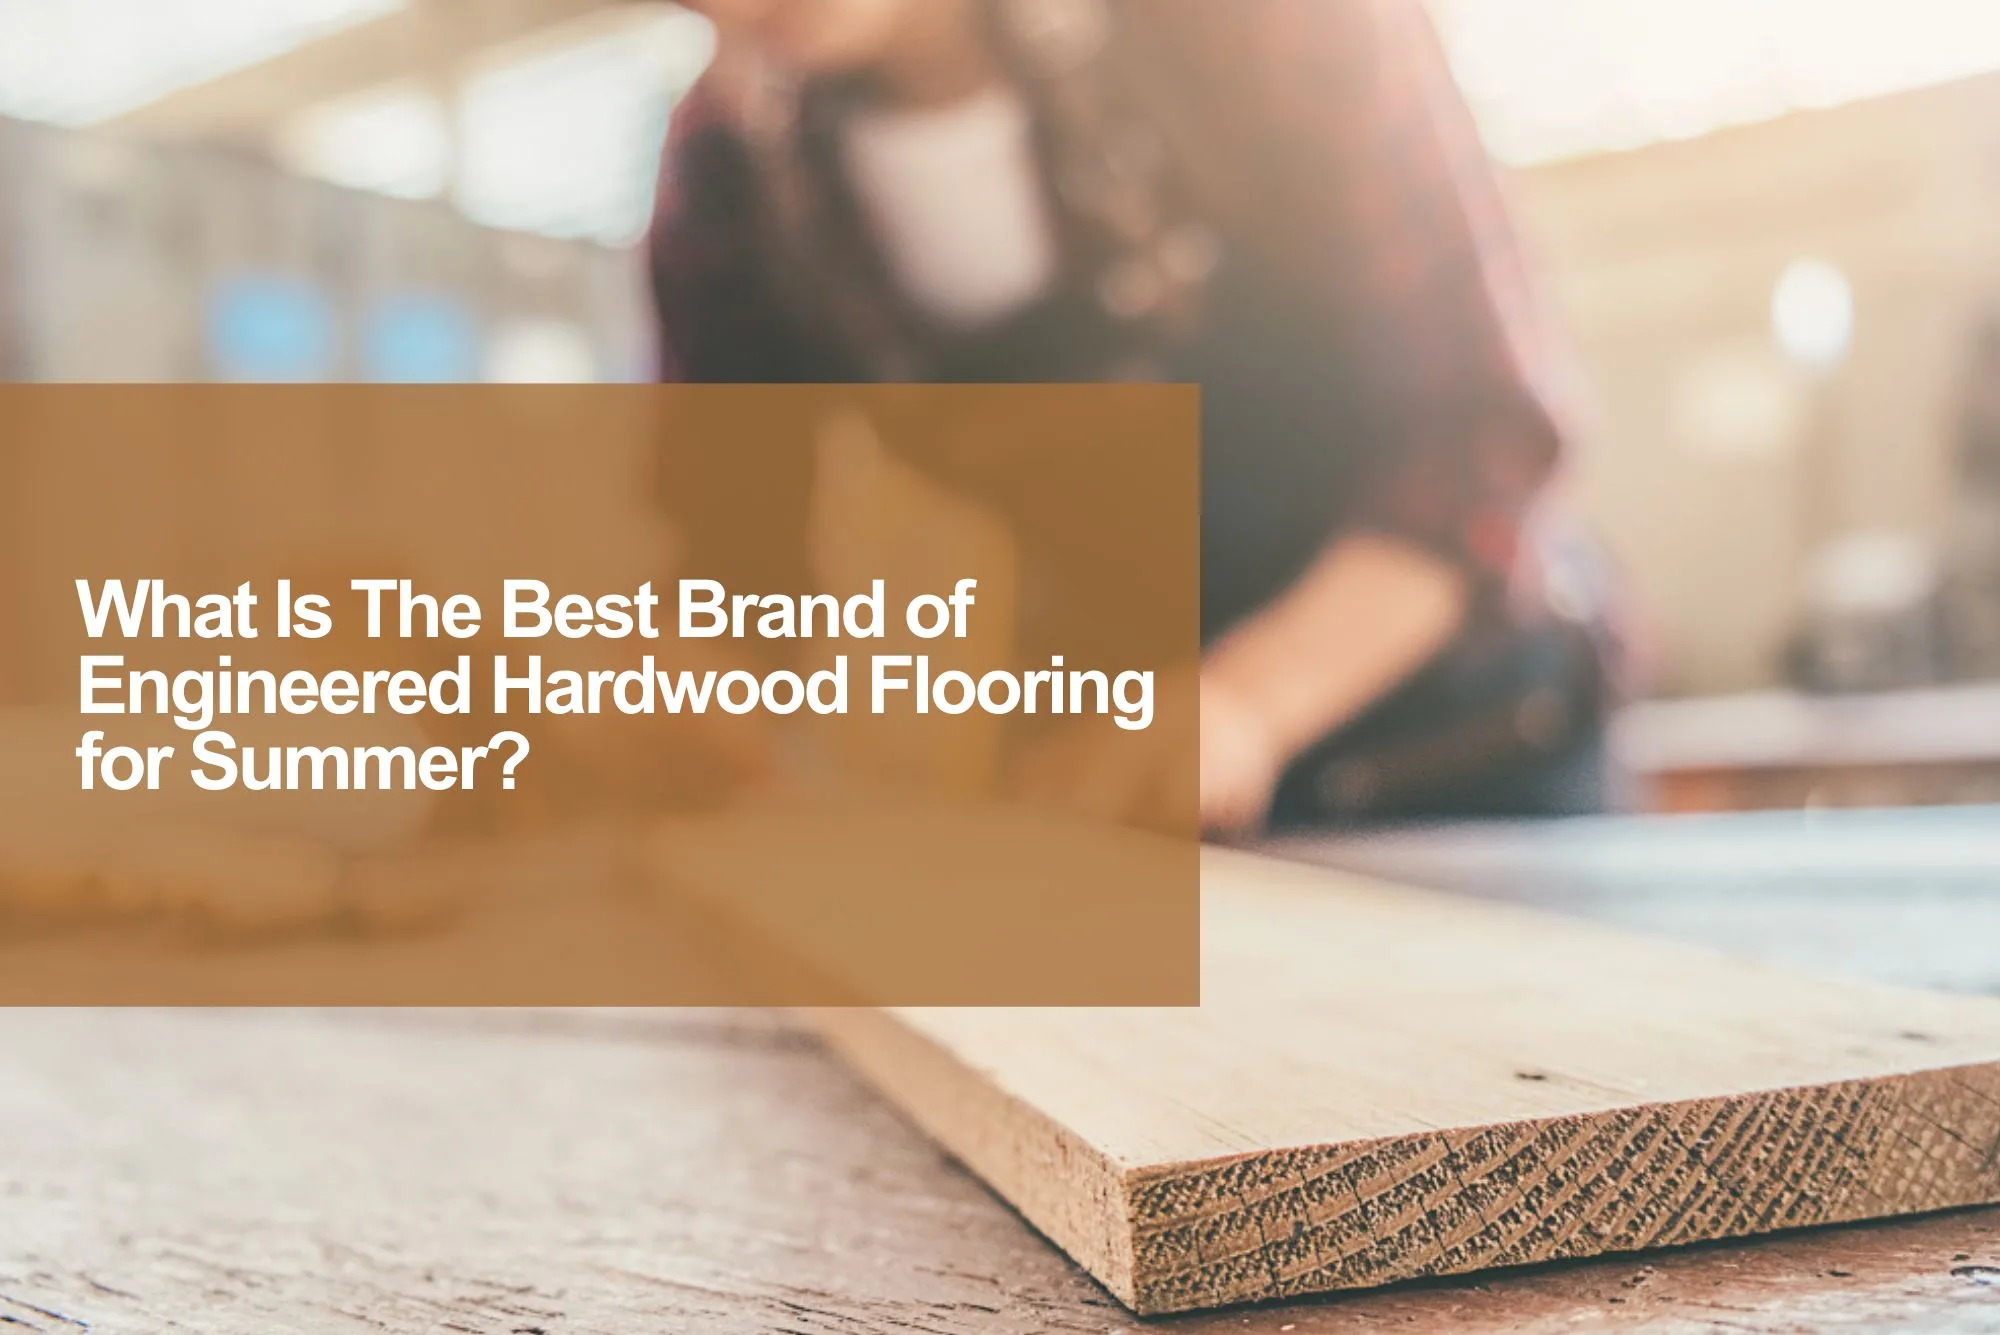 What Is The Best Brand of Engineered Hardwood Flooring for Summer?